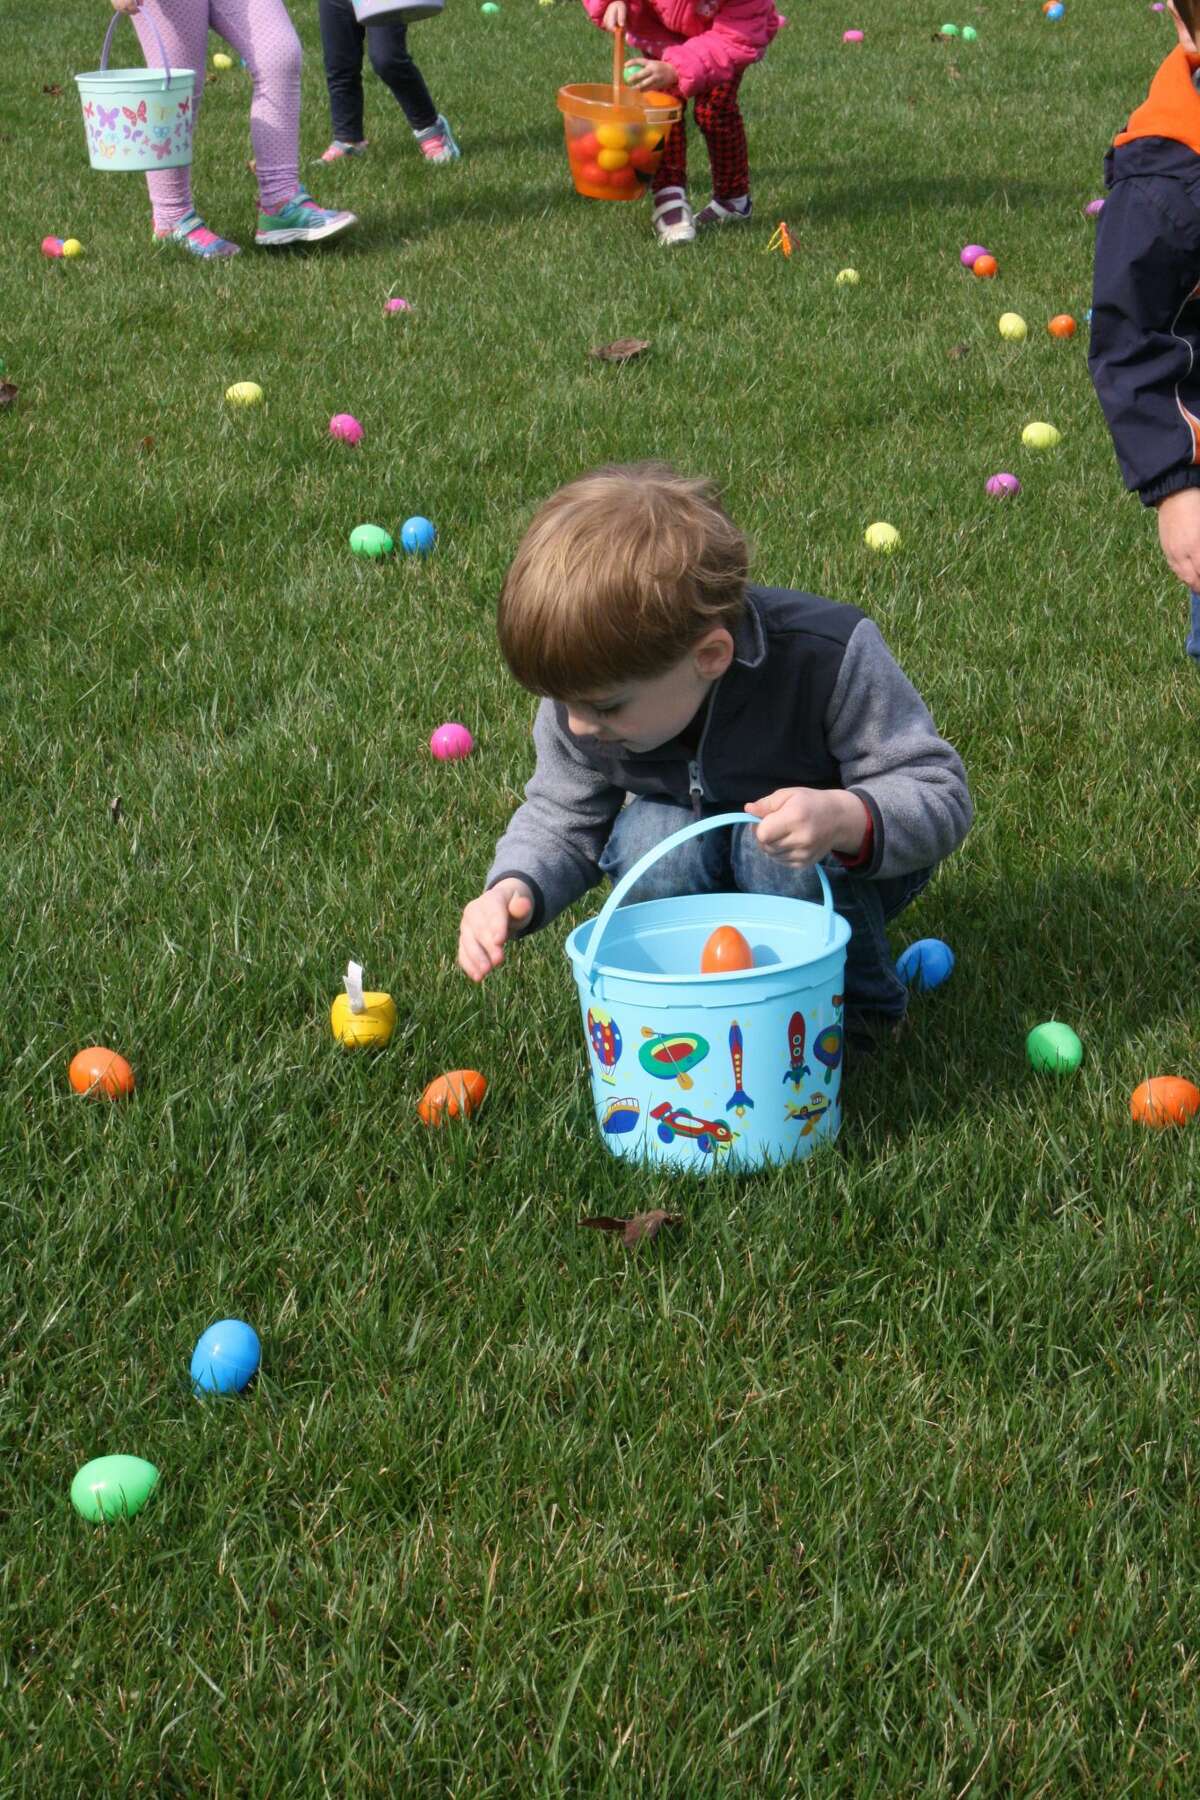 The Pigeon Chamber of Commerce sponsored Saturday’s Easter egg hunt in Pigeon.